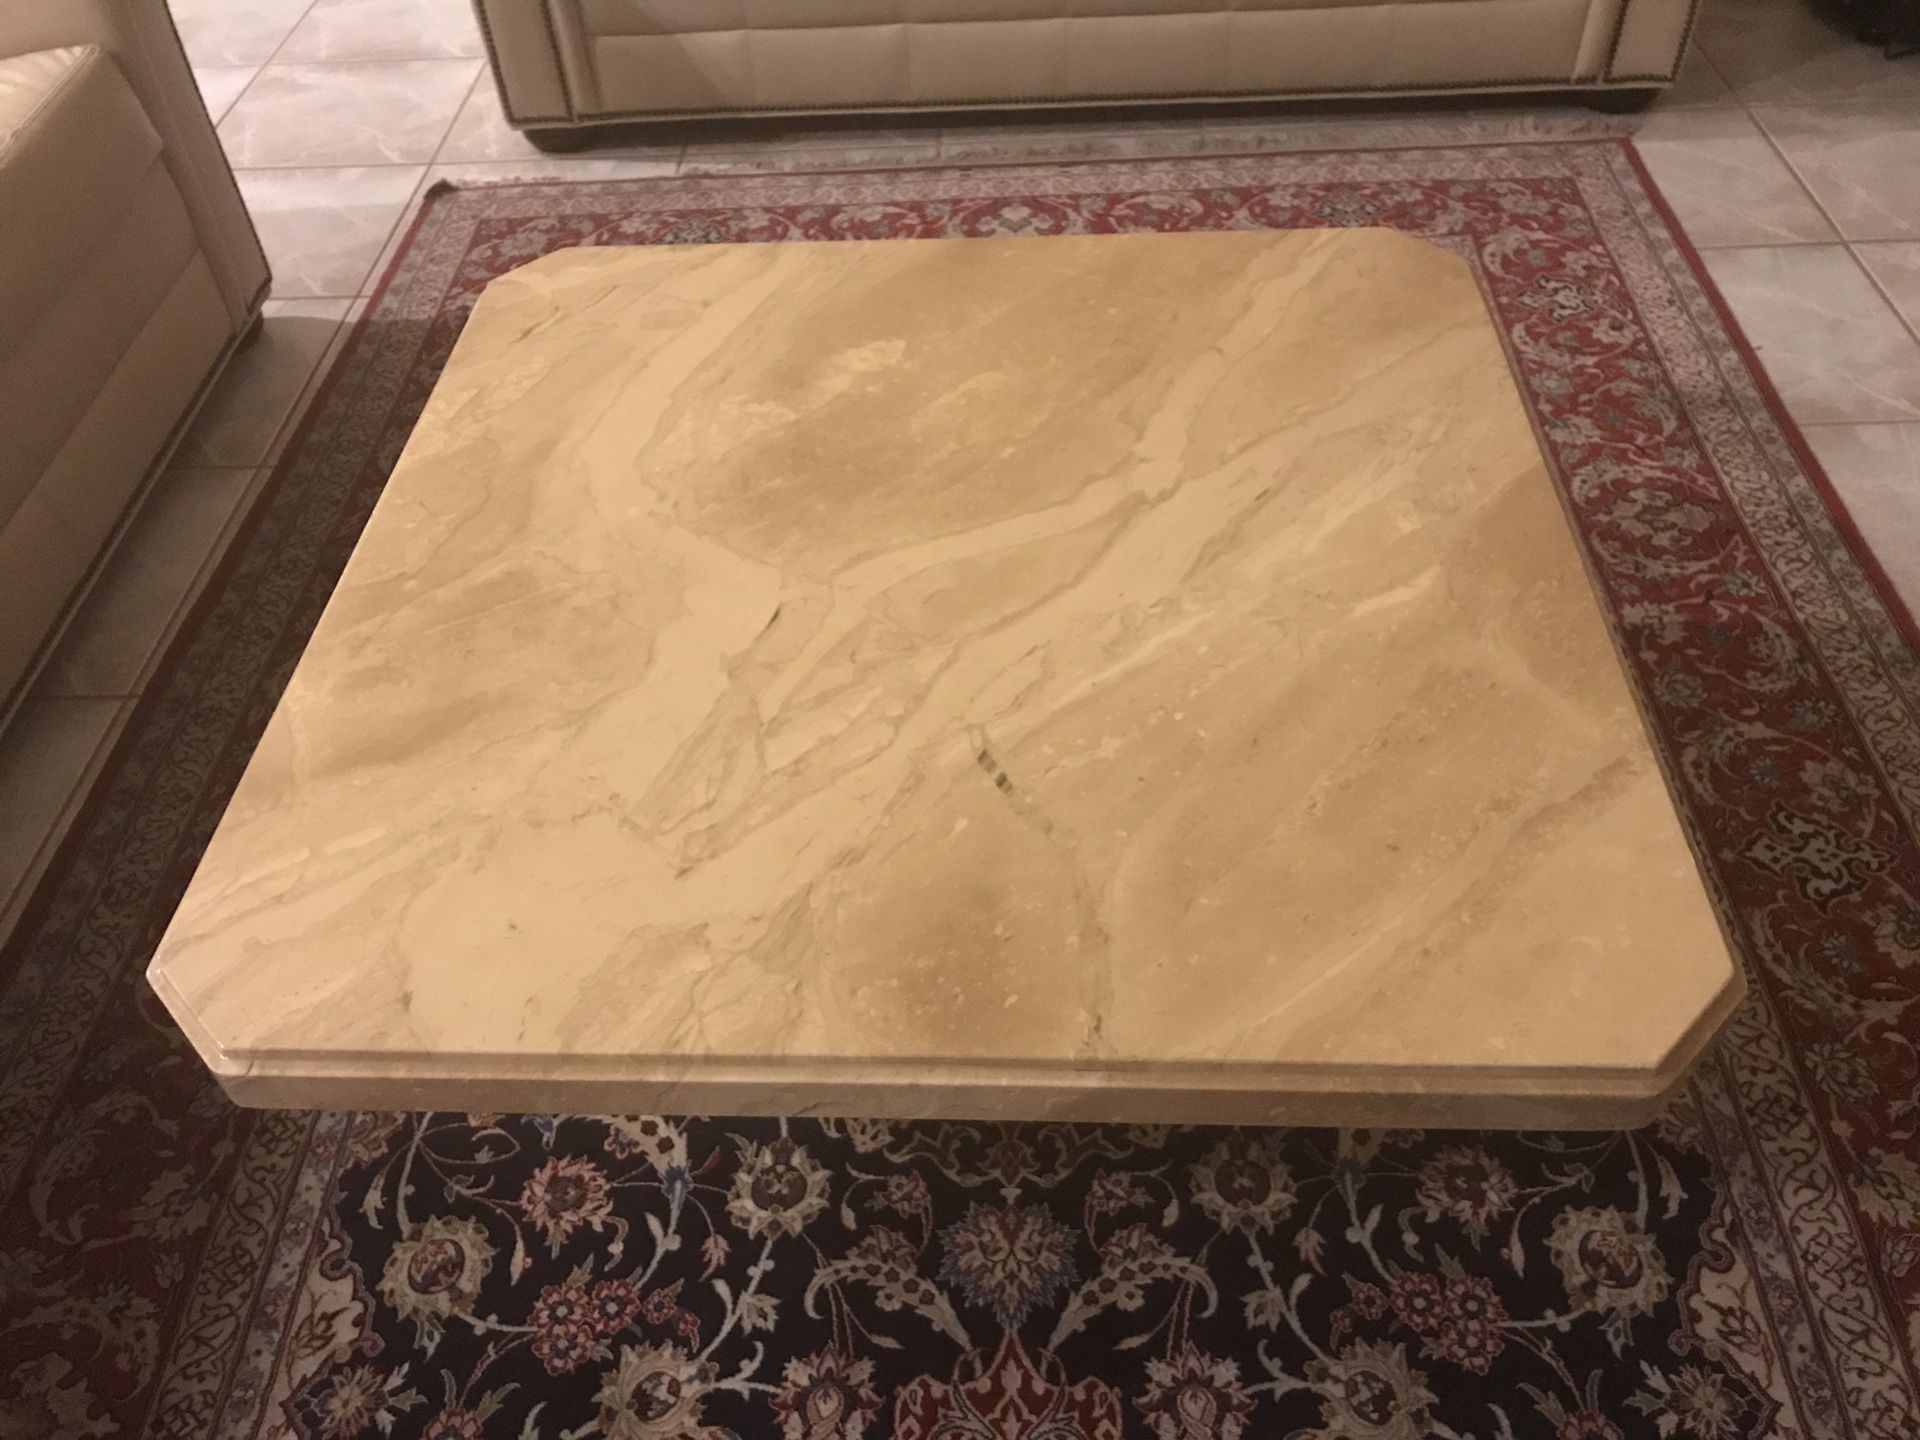 3 pieces Marble Coffee Table 39 “x39” / height 4” End Tables 28” x28” / height 9” 3